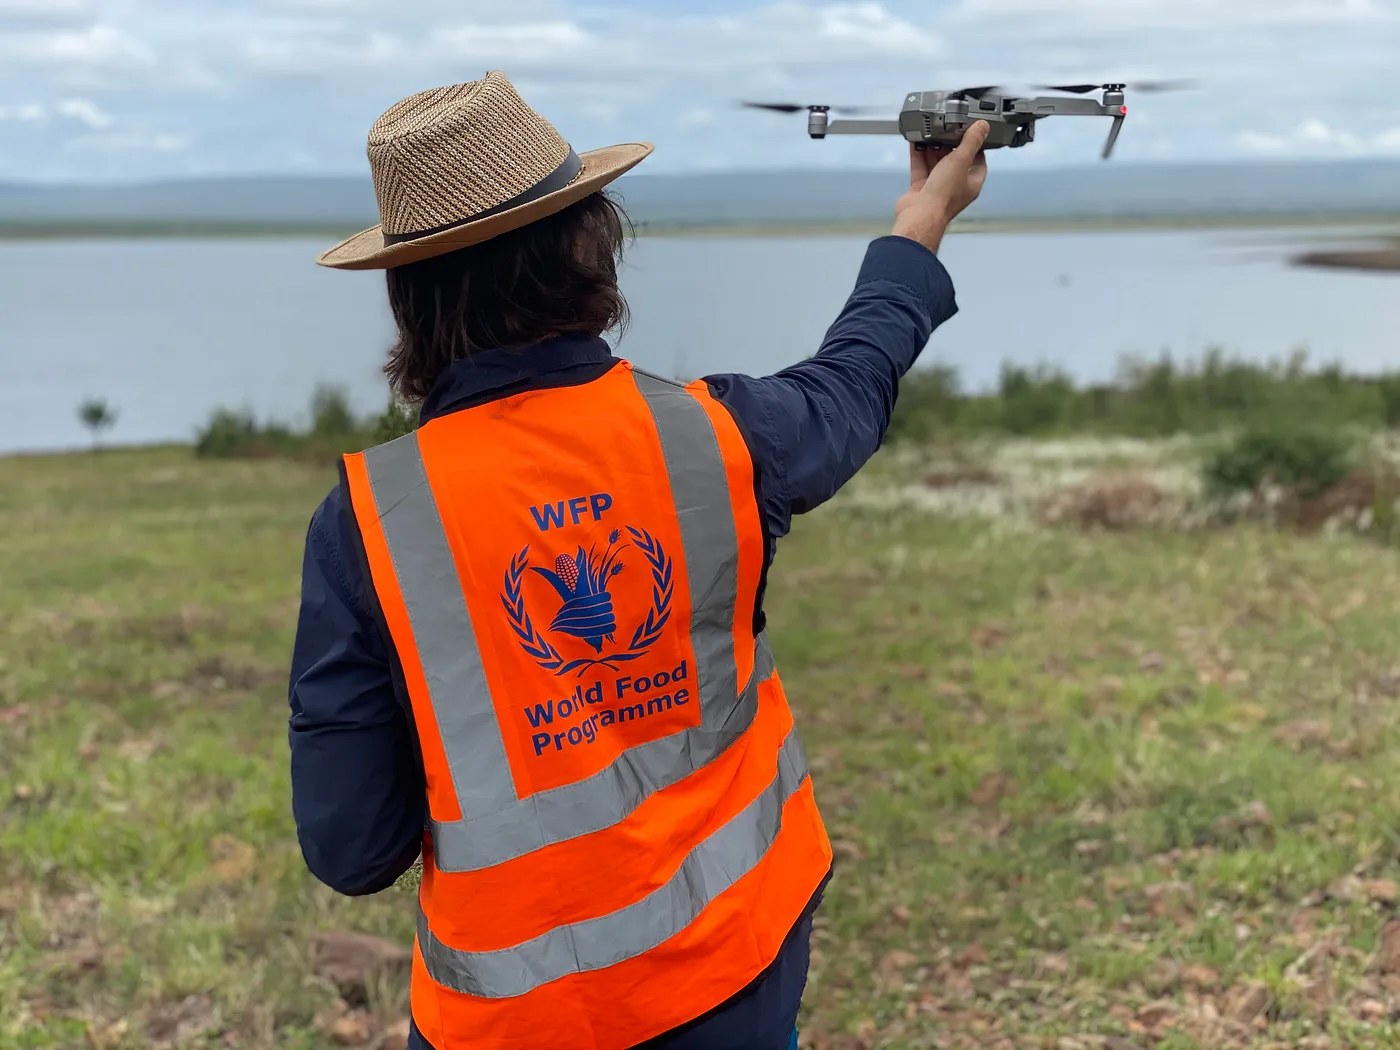 Patrick McKay, UAS Data Operations Manager at the World Food Programme (WFP), launches a drone.